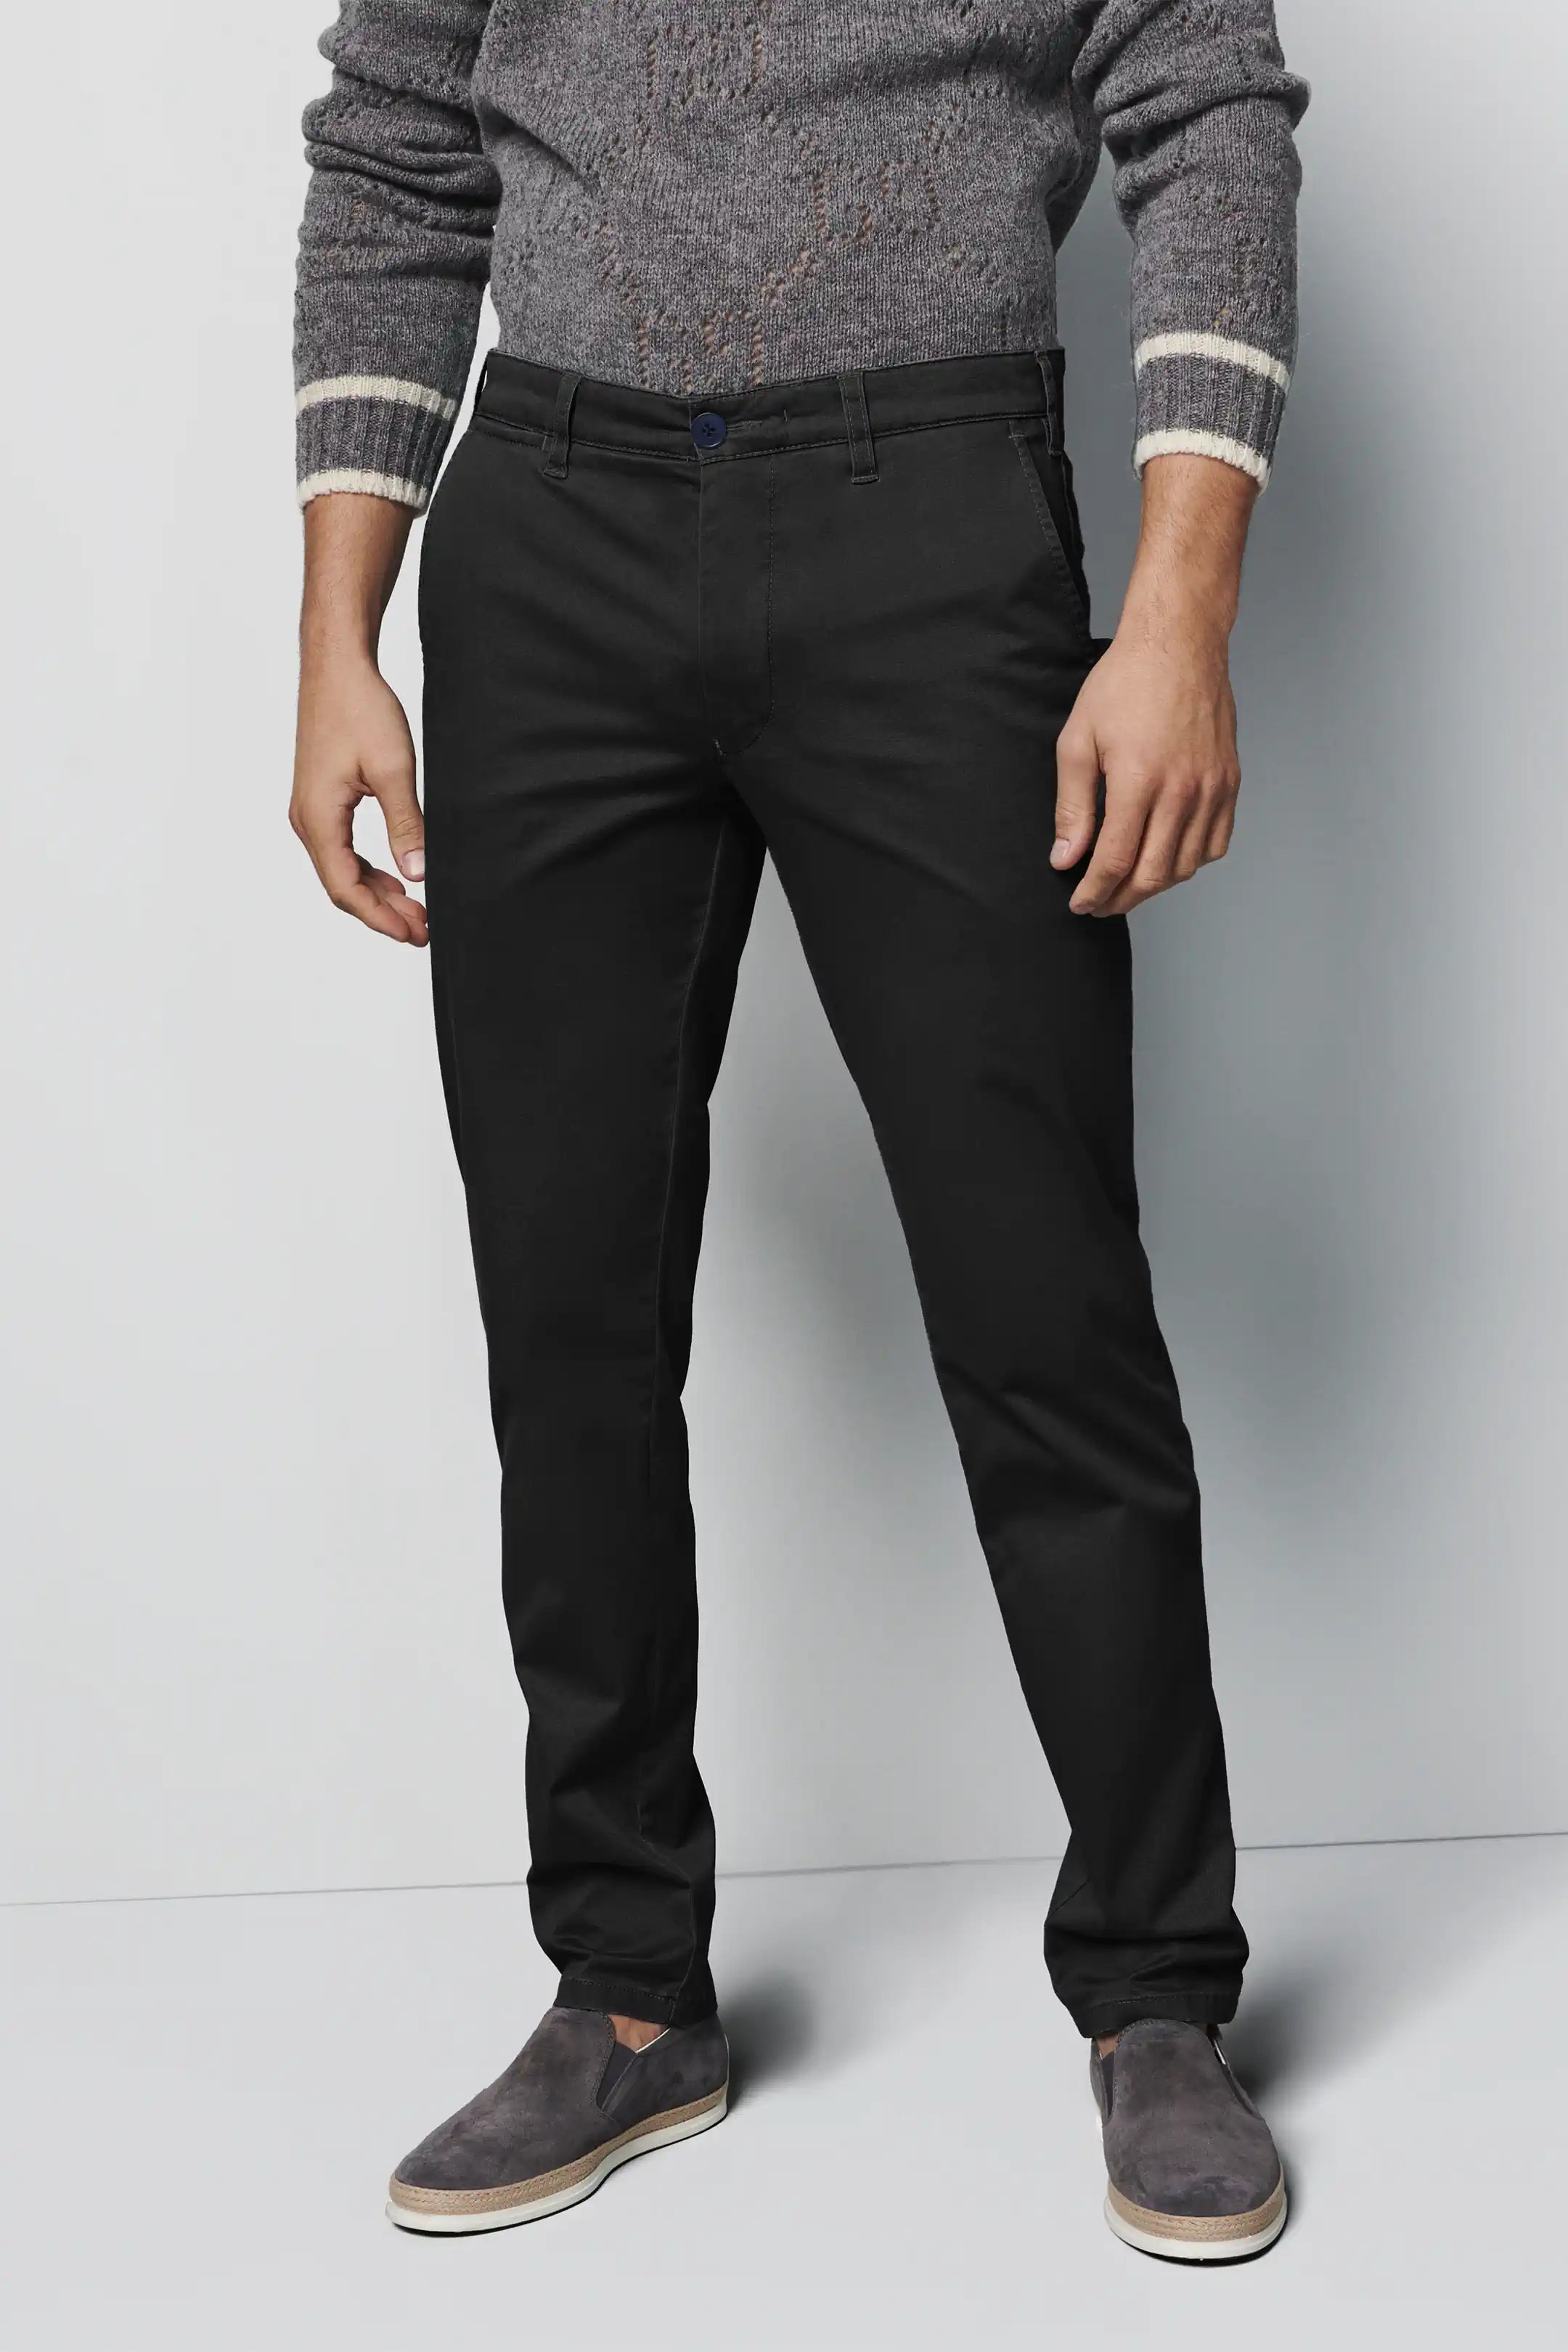 MEYER M5 Trousers - 6001 Soft Stretch Cotton Chinos - Black